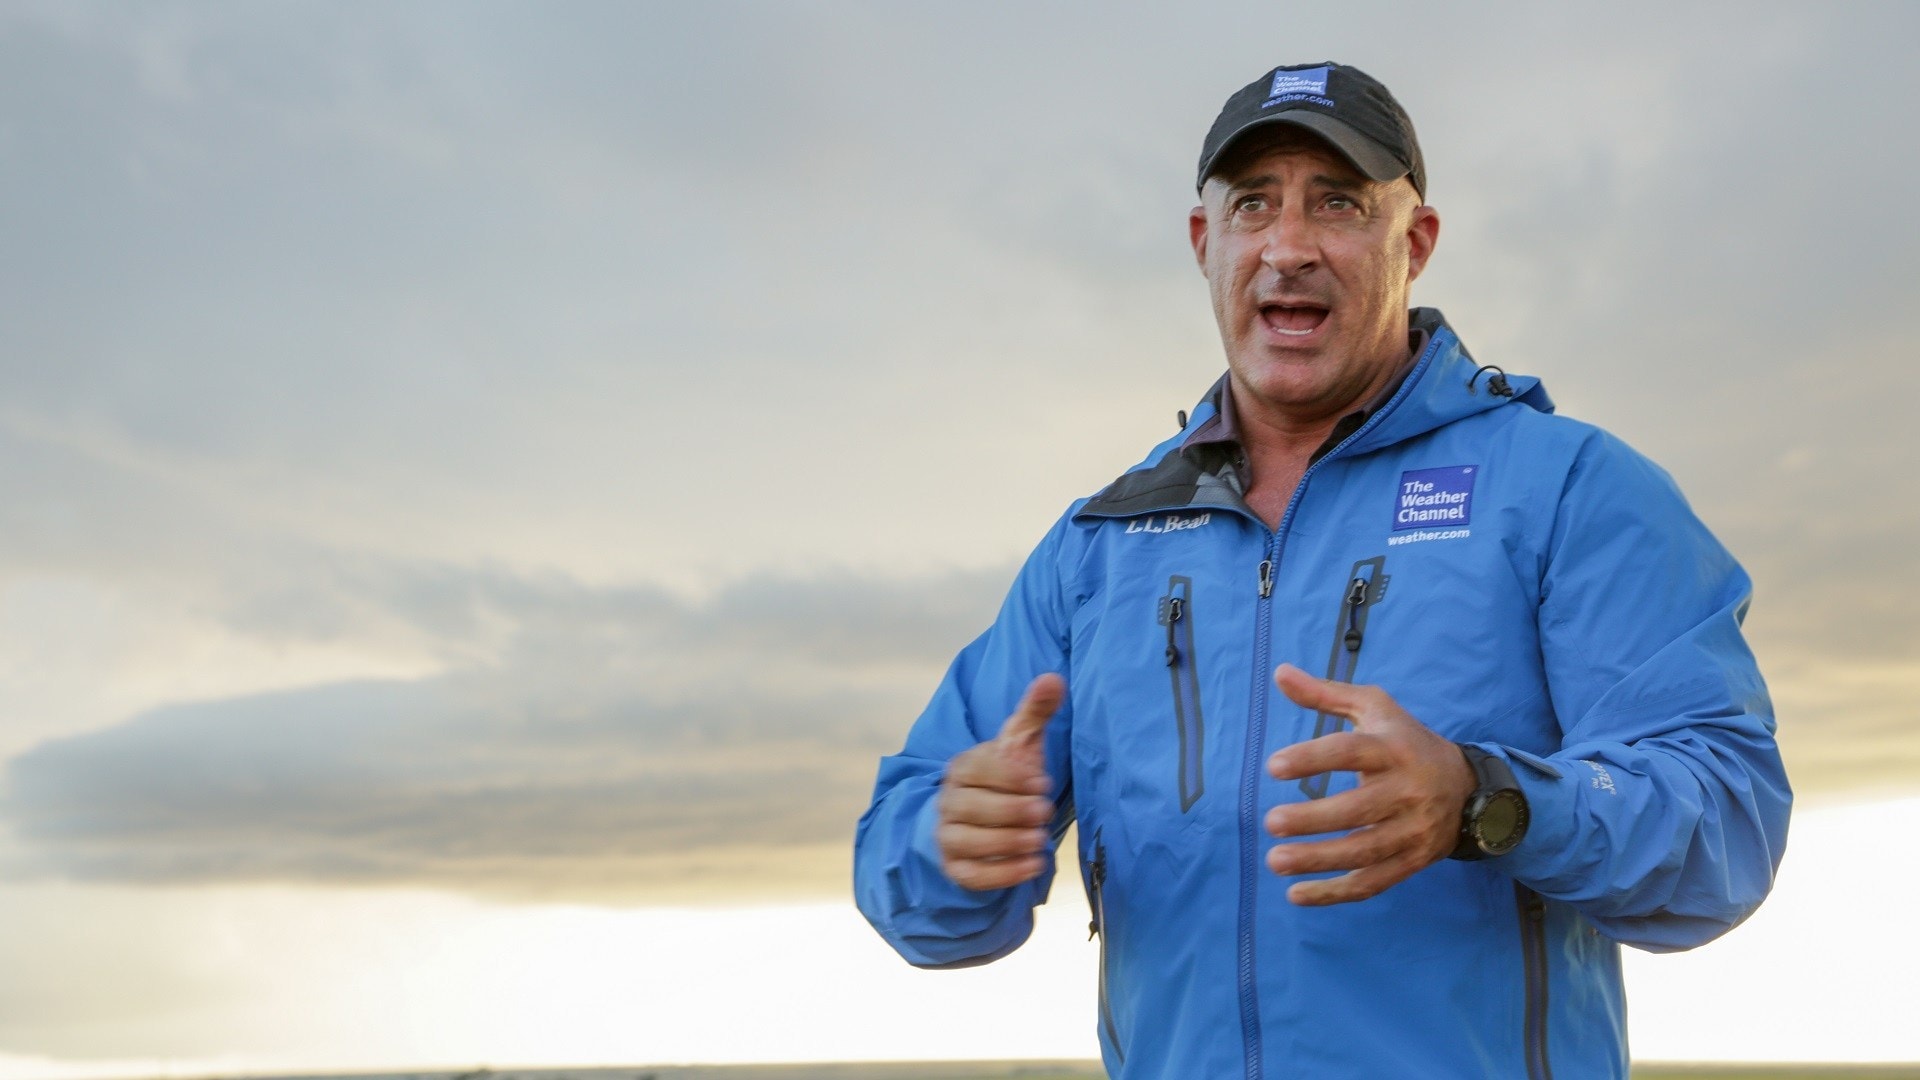 The Weather Channel’s Jim Cantore covering severe weather in Oklahoma City, OK on May 9